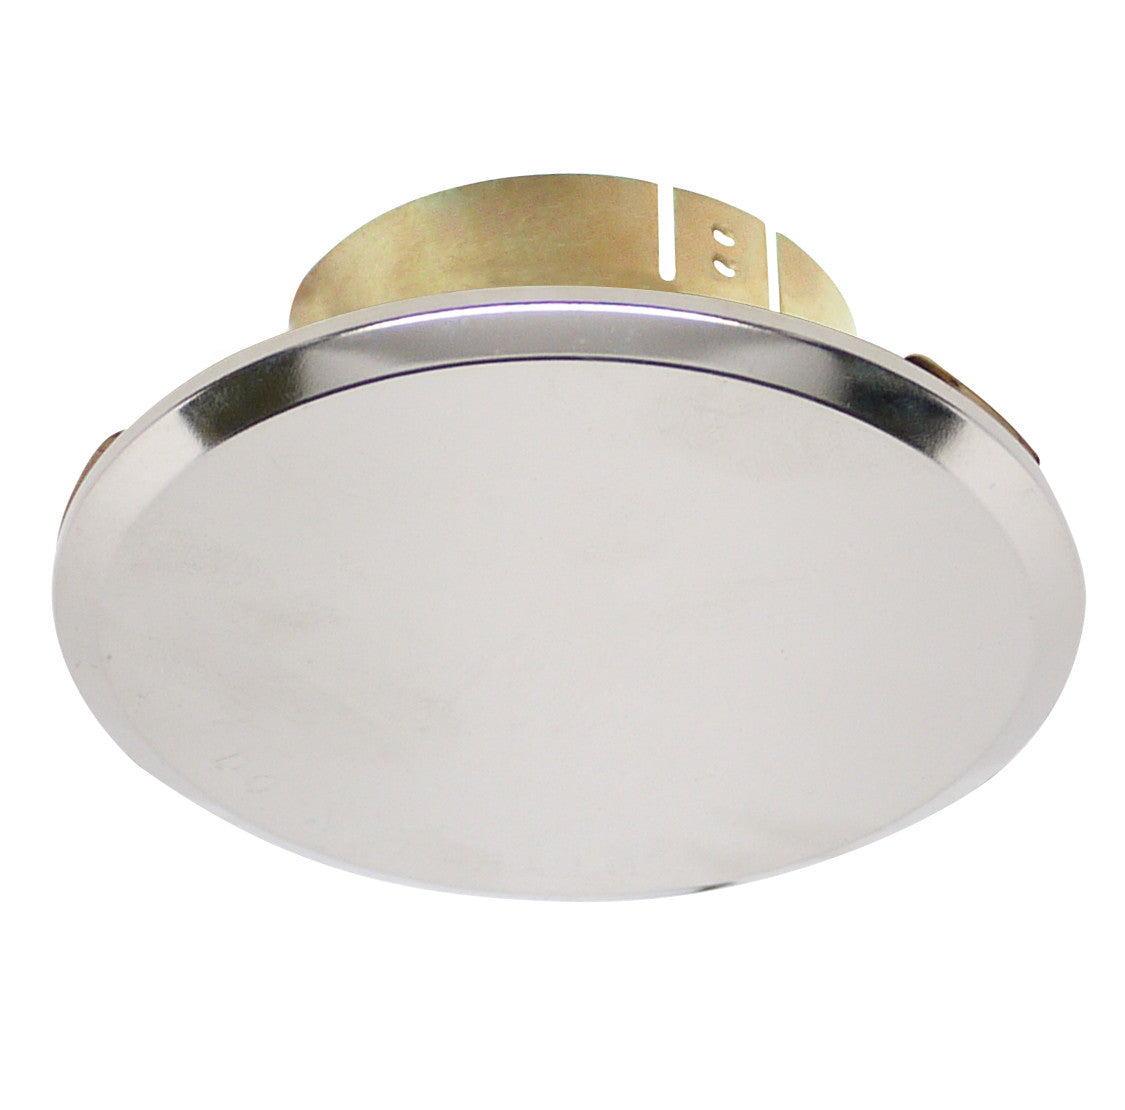 Cover Plate for RC Sprinklers, Residential/Commercial, 3-1/4" Round, Nickel (Mirror Finish)